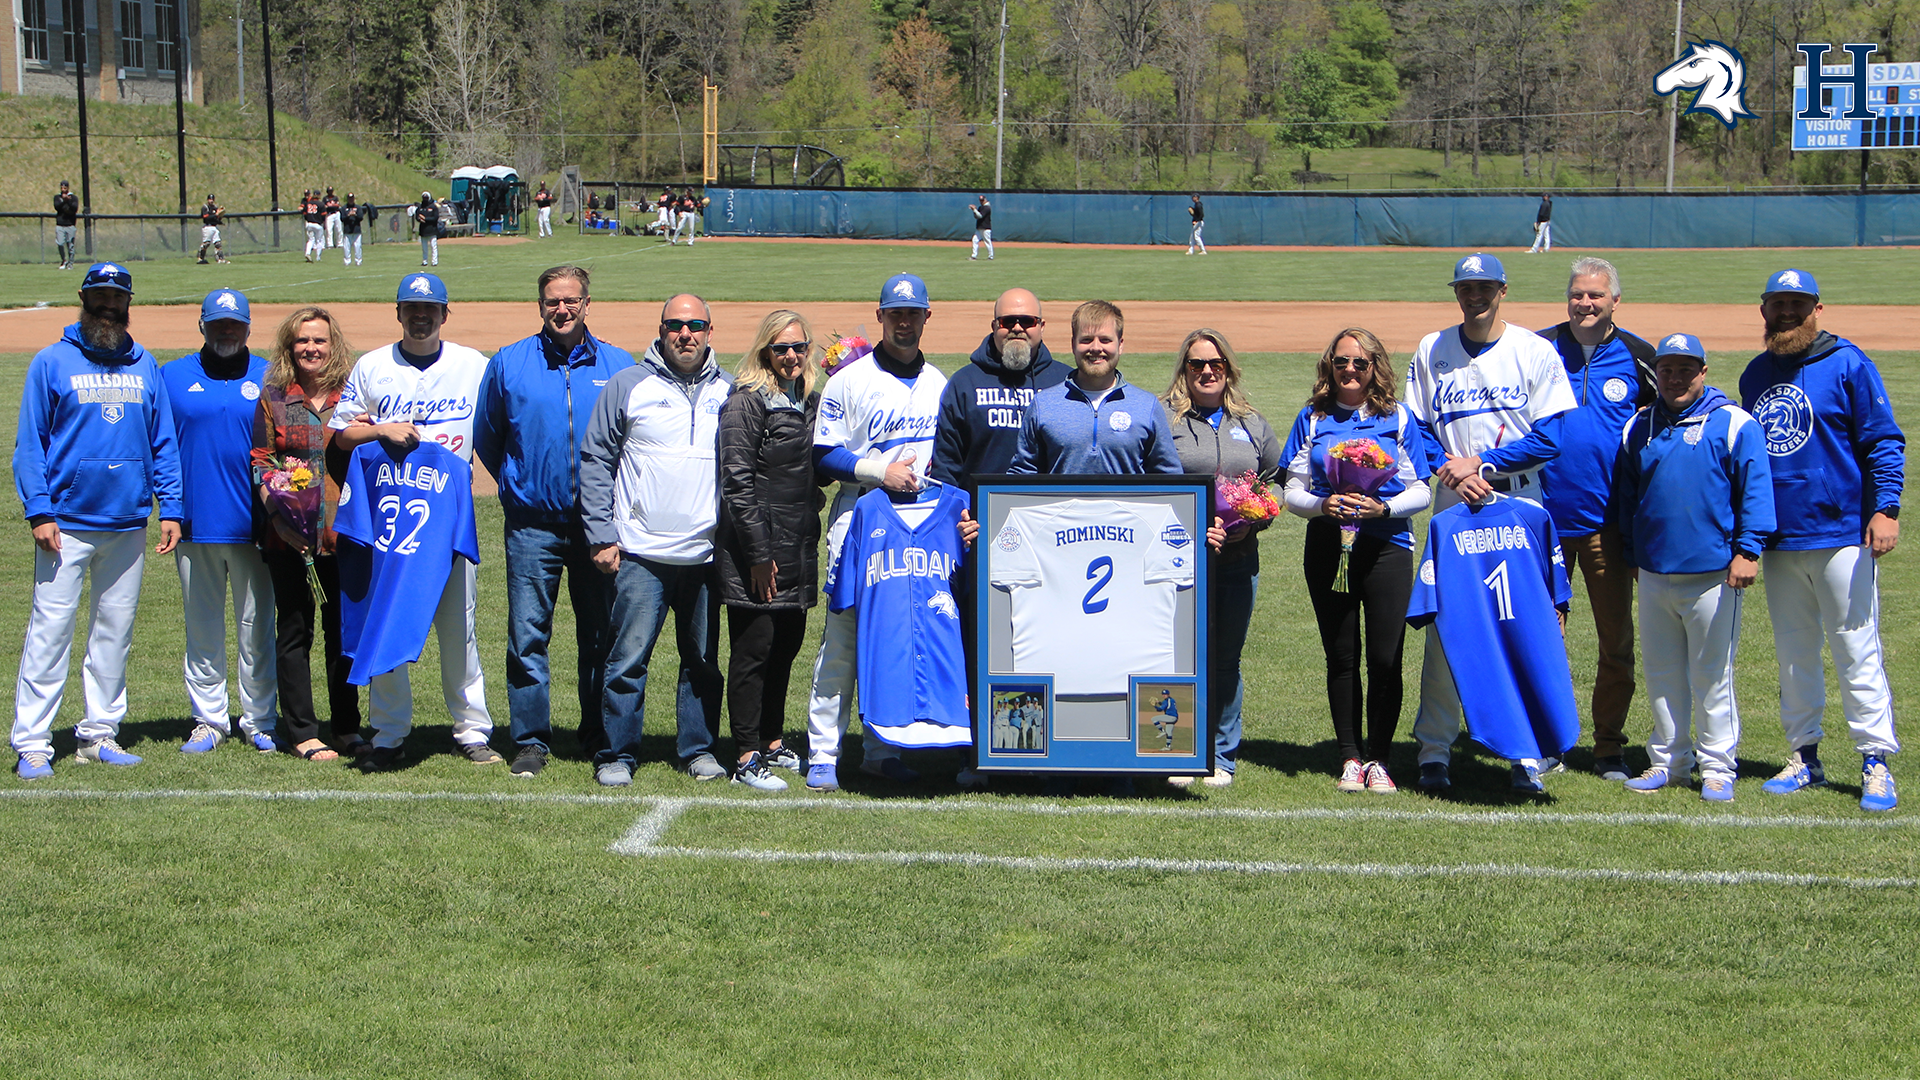 Chargers secure sixth seed in G-MAC tourney with senior day split